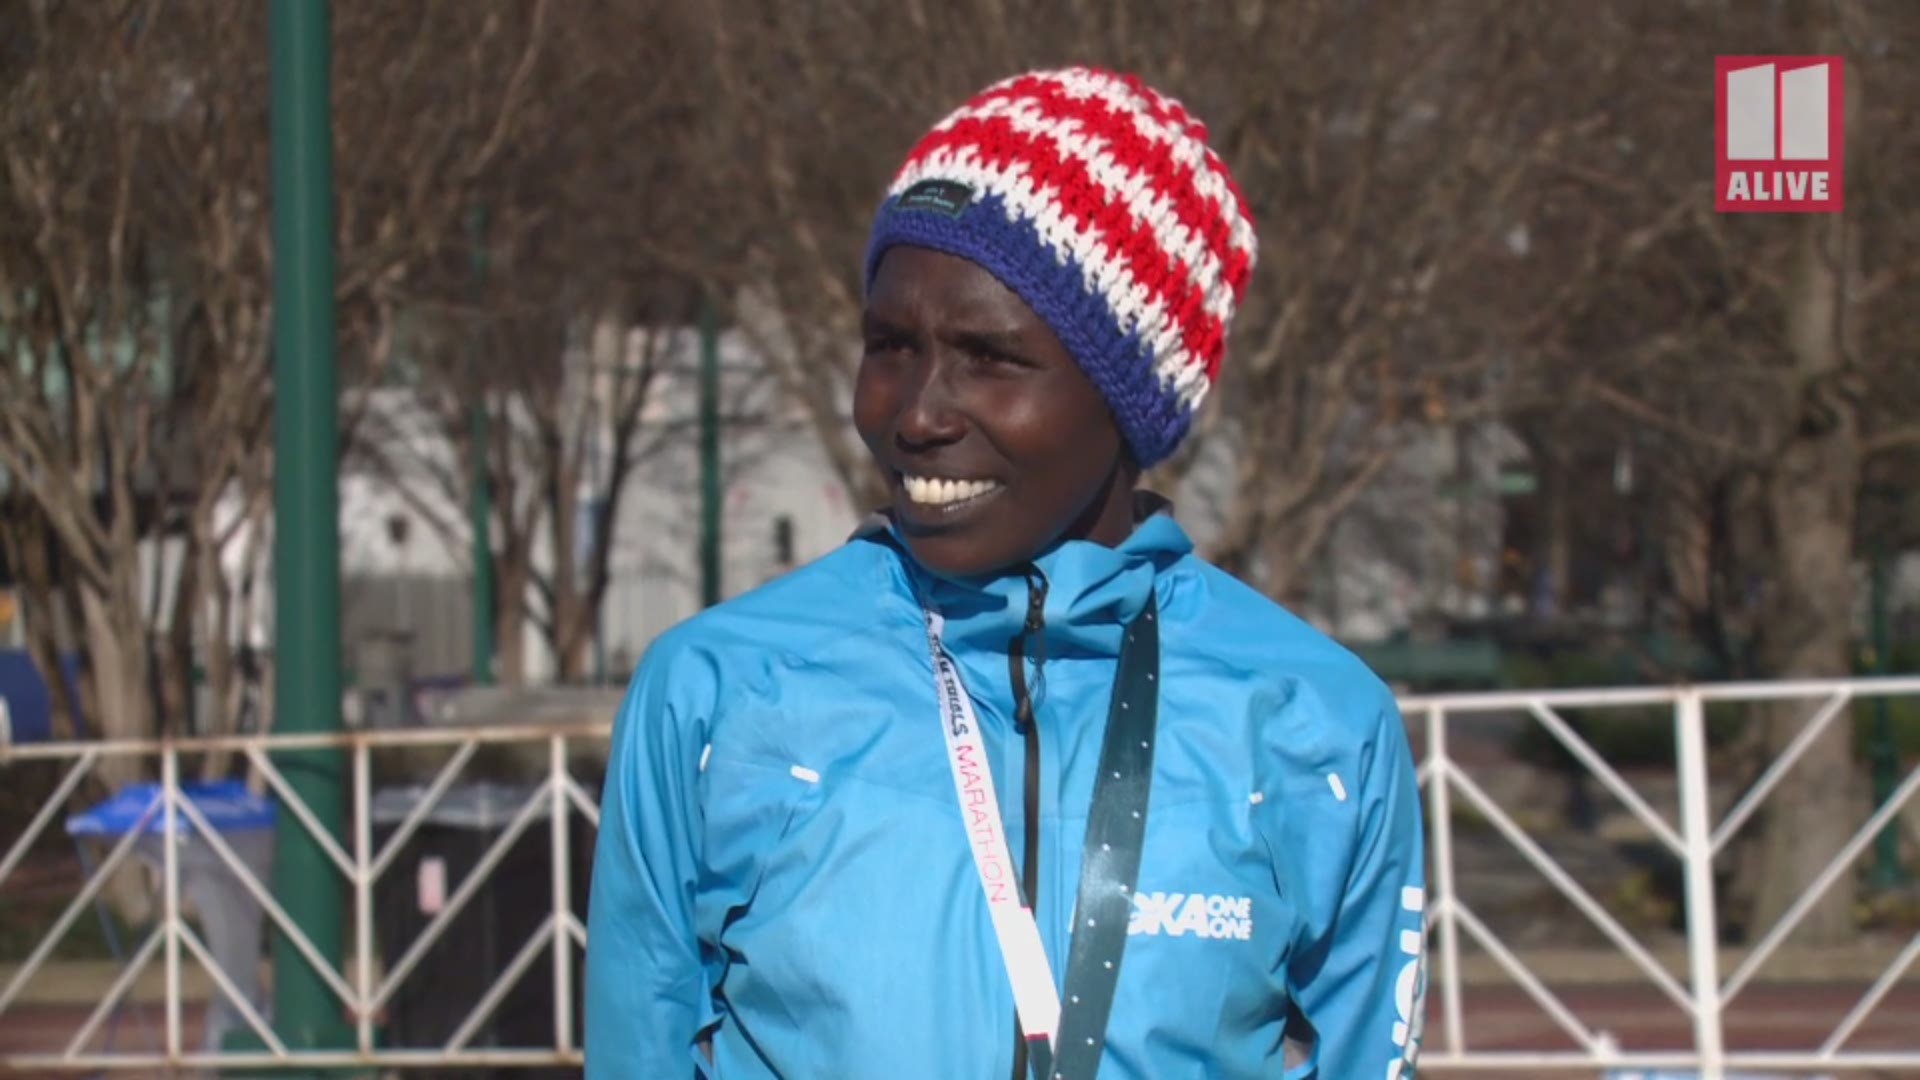 Aliphine Tuliamuk, a past winner of the AJC Peachtree Road Race, finished 7 seconds ahead of the 2nd-place finisher and will be heading to her first Olympic Games.